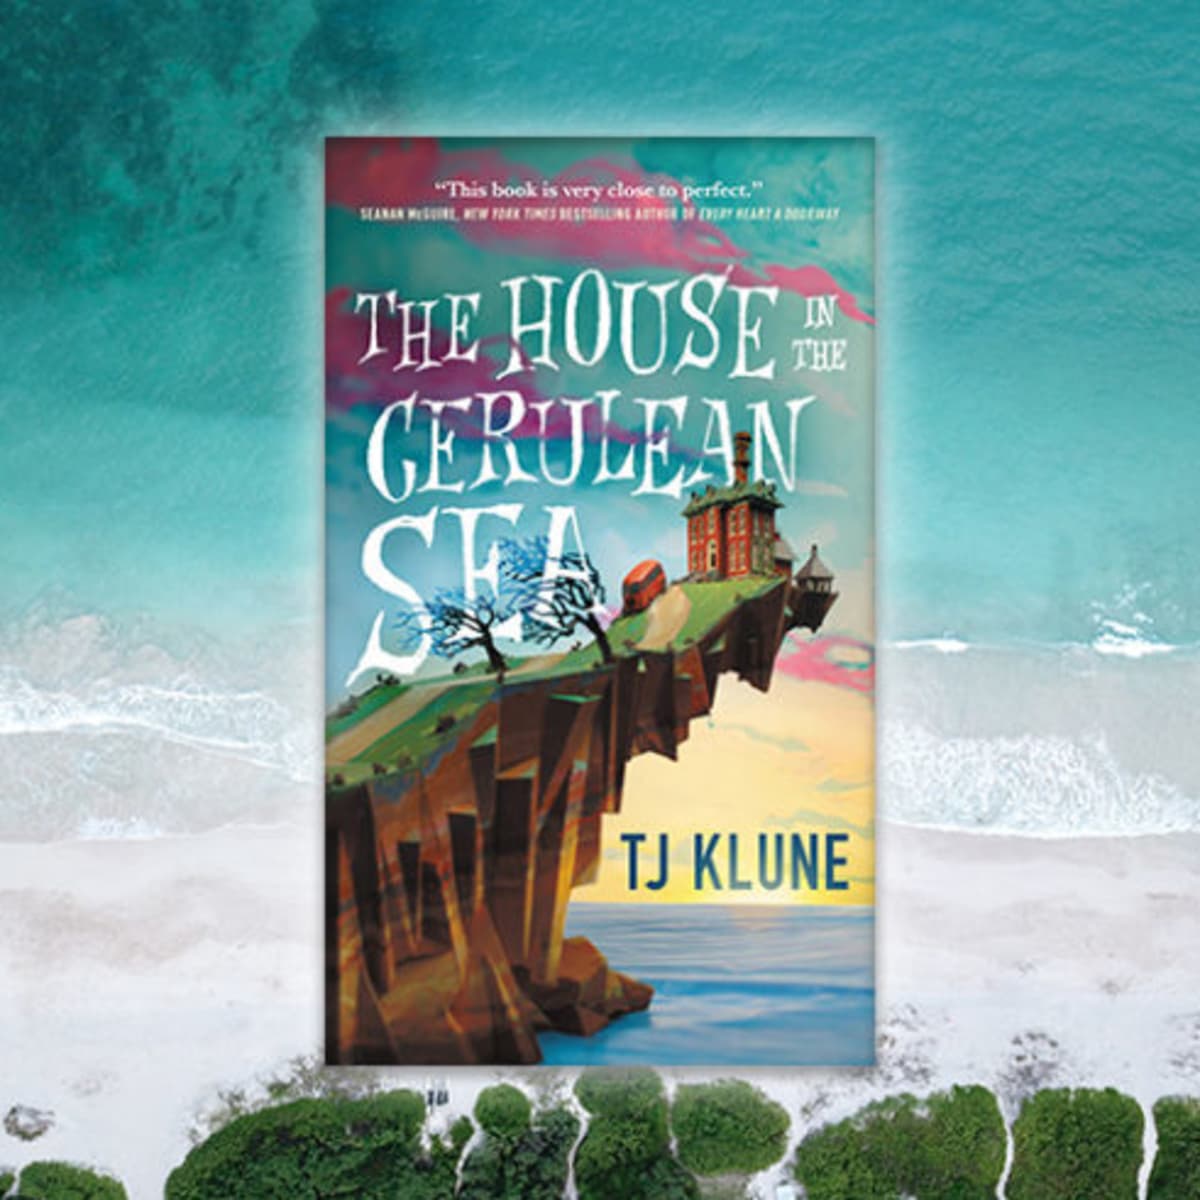 10 Reasons to Read 'The House in the Cerulean Sea' - HubPages